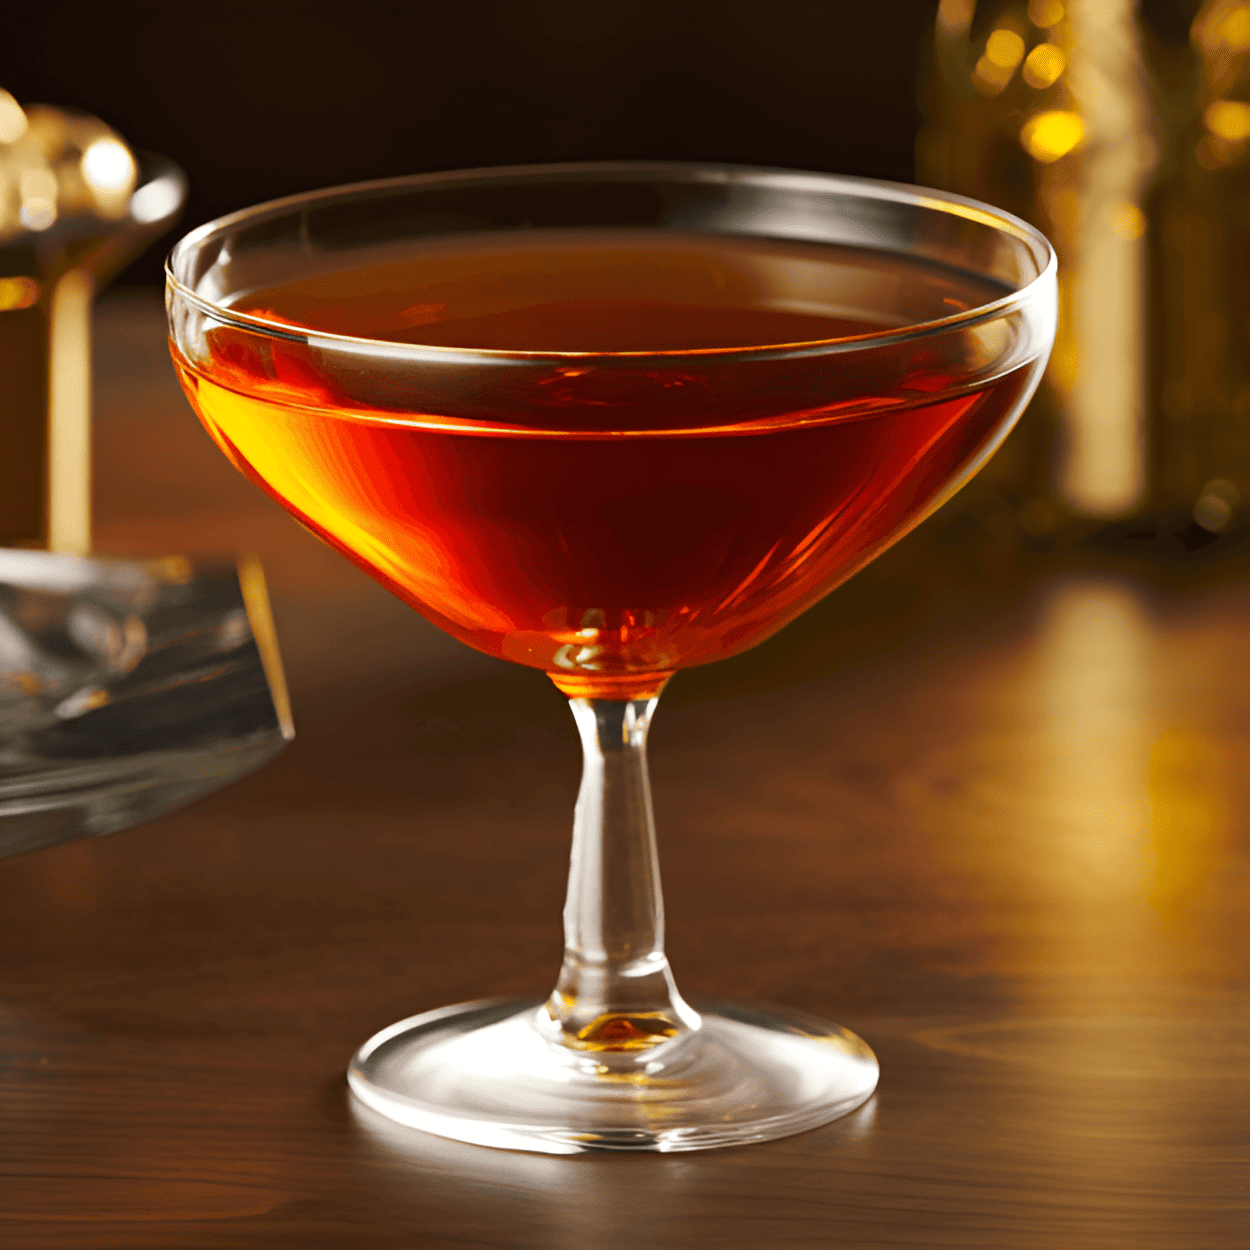 Hunter Cocktail Recipe - The Hunter cocktail is a strong, robust drink with a rich, smoky flavor. The whiskey provides a warm, full-bodied taste that's complemented by the sweet, fruity notes of the cherry brandy. The bitters add a slight bitterness that balances out the sweetness, resulting in a well-rounded, complex flavor profile.